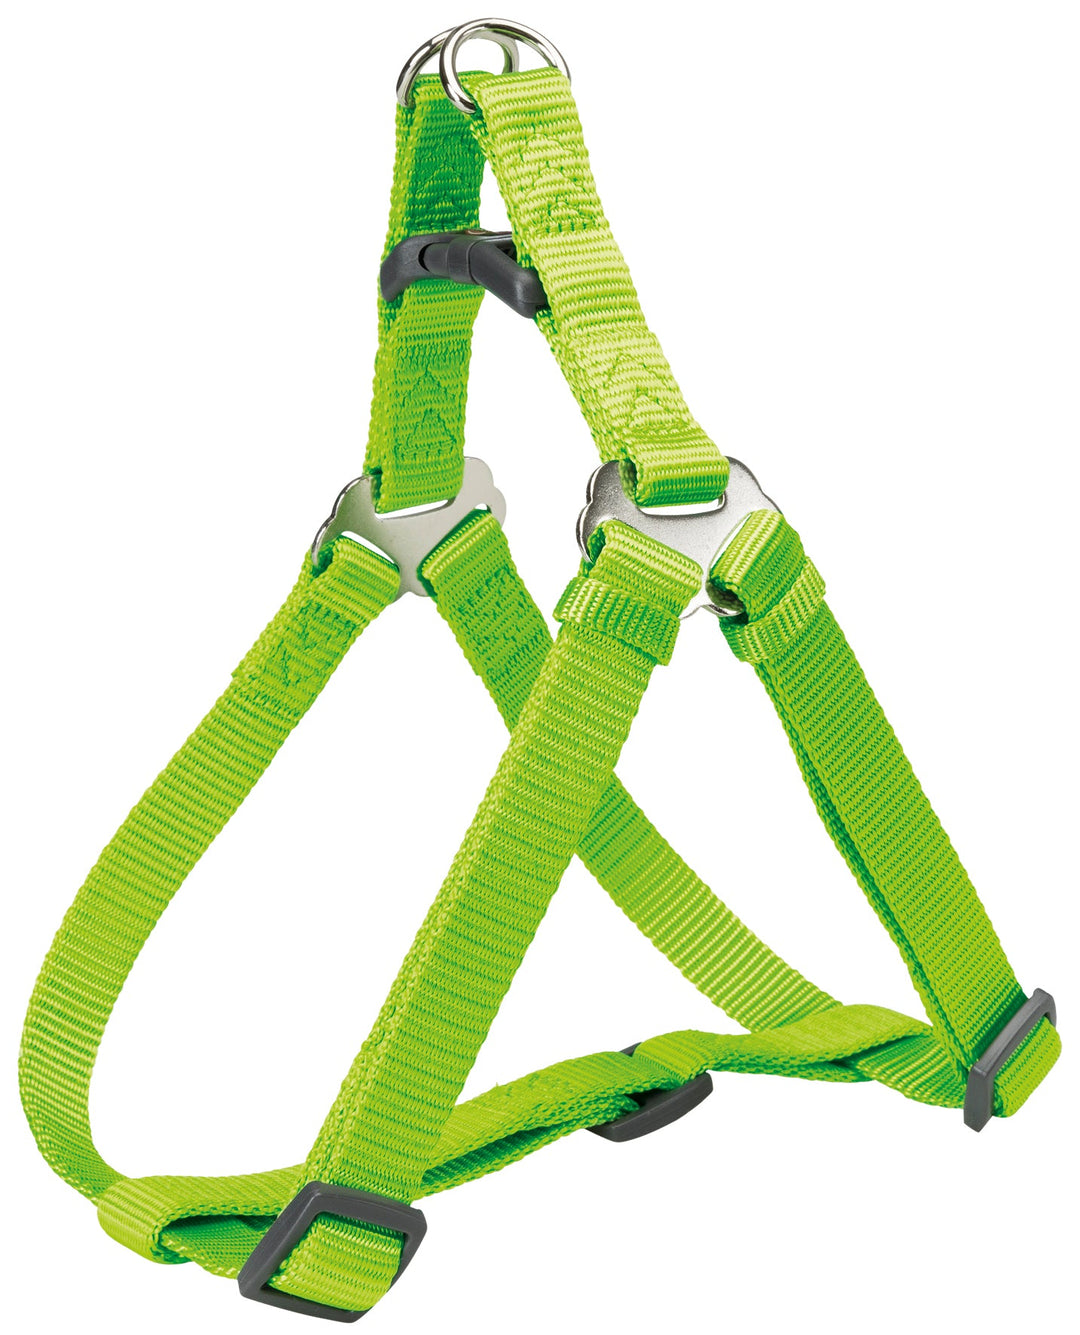 Premium One Touch harness